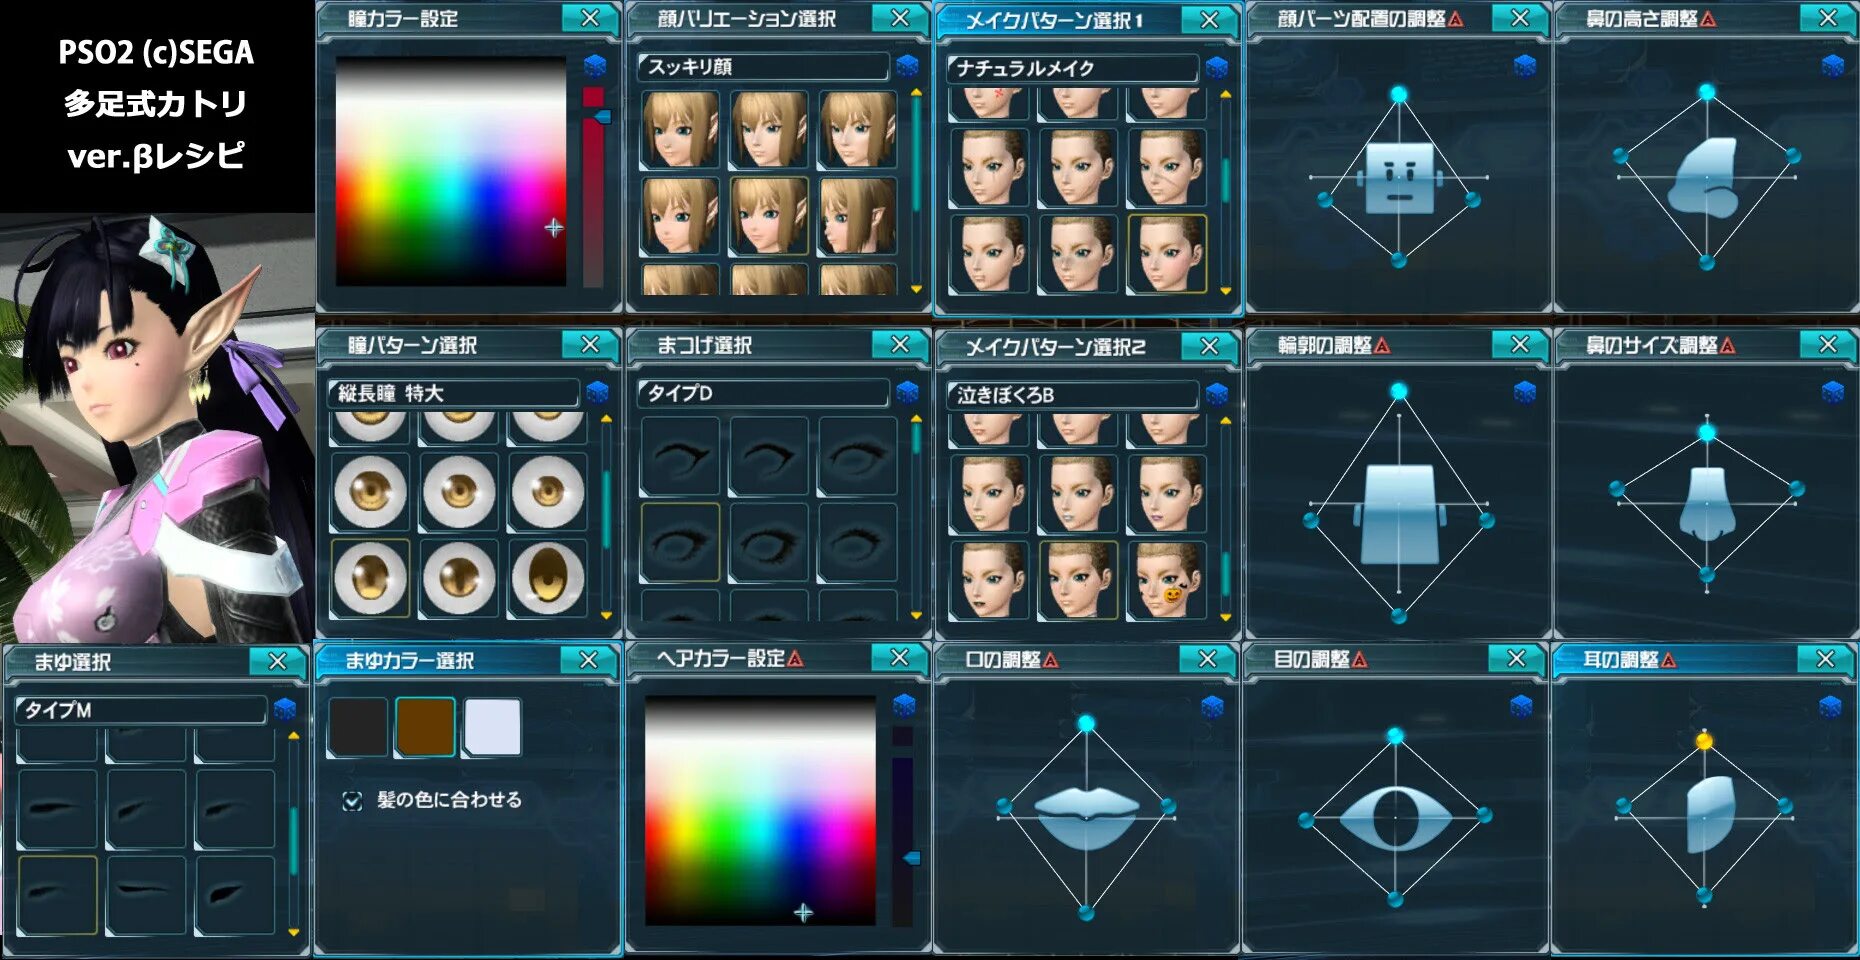 Hotskins6 org. Ио pso2. Pso2 630. Pso2 Harmo;. PSO NGS.